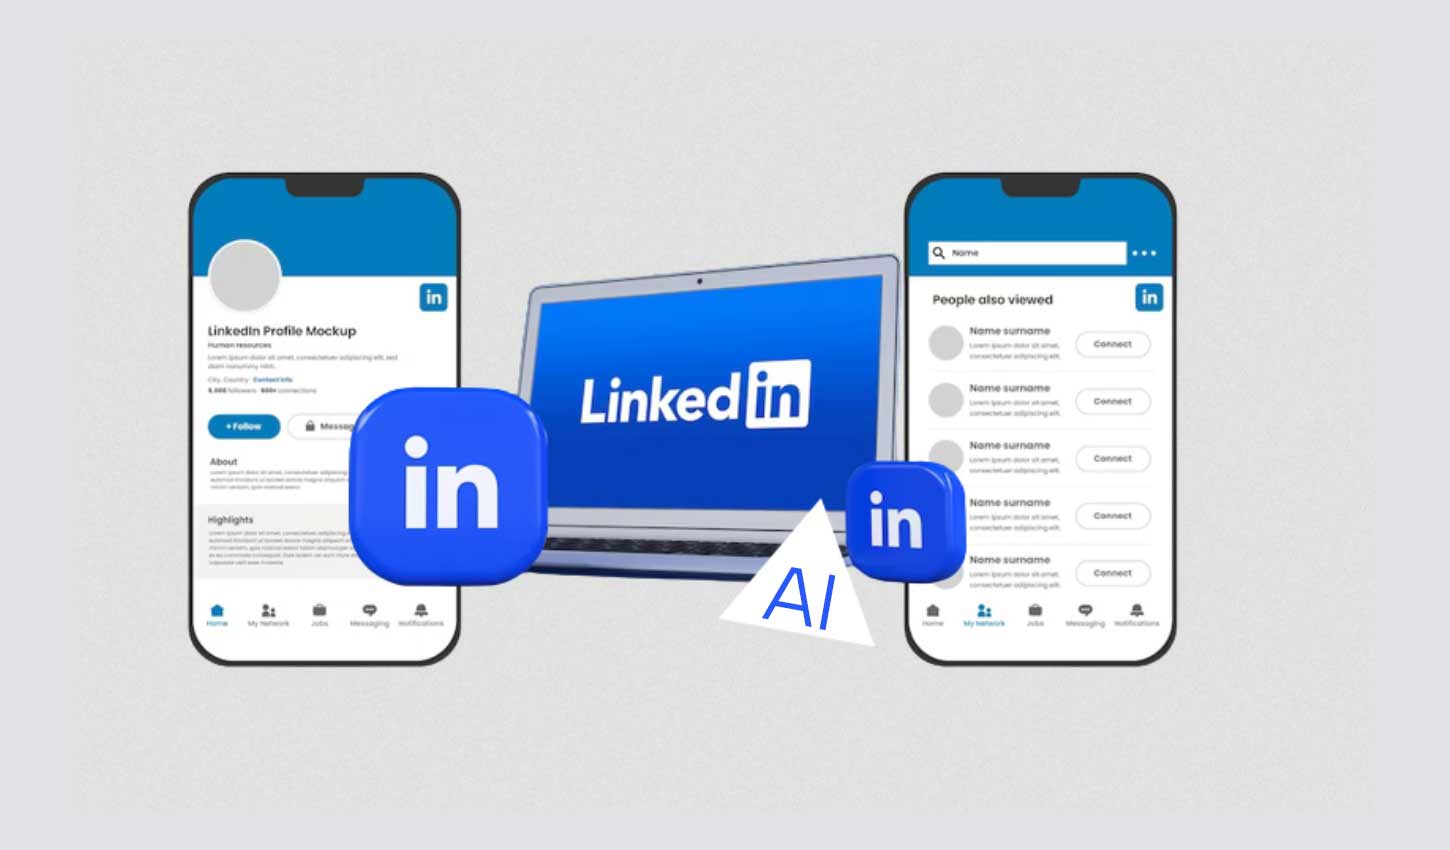 LinkedIn Hits 1 Billion Members, Adds AI Features For Job Seekers